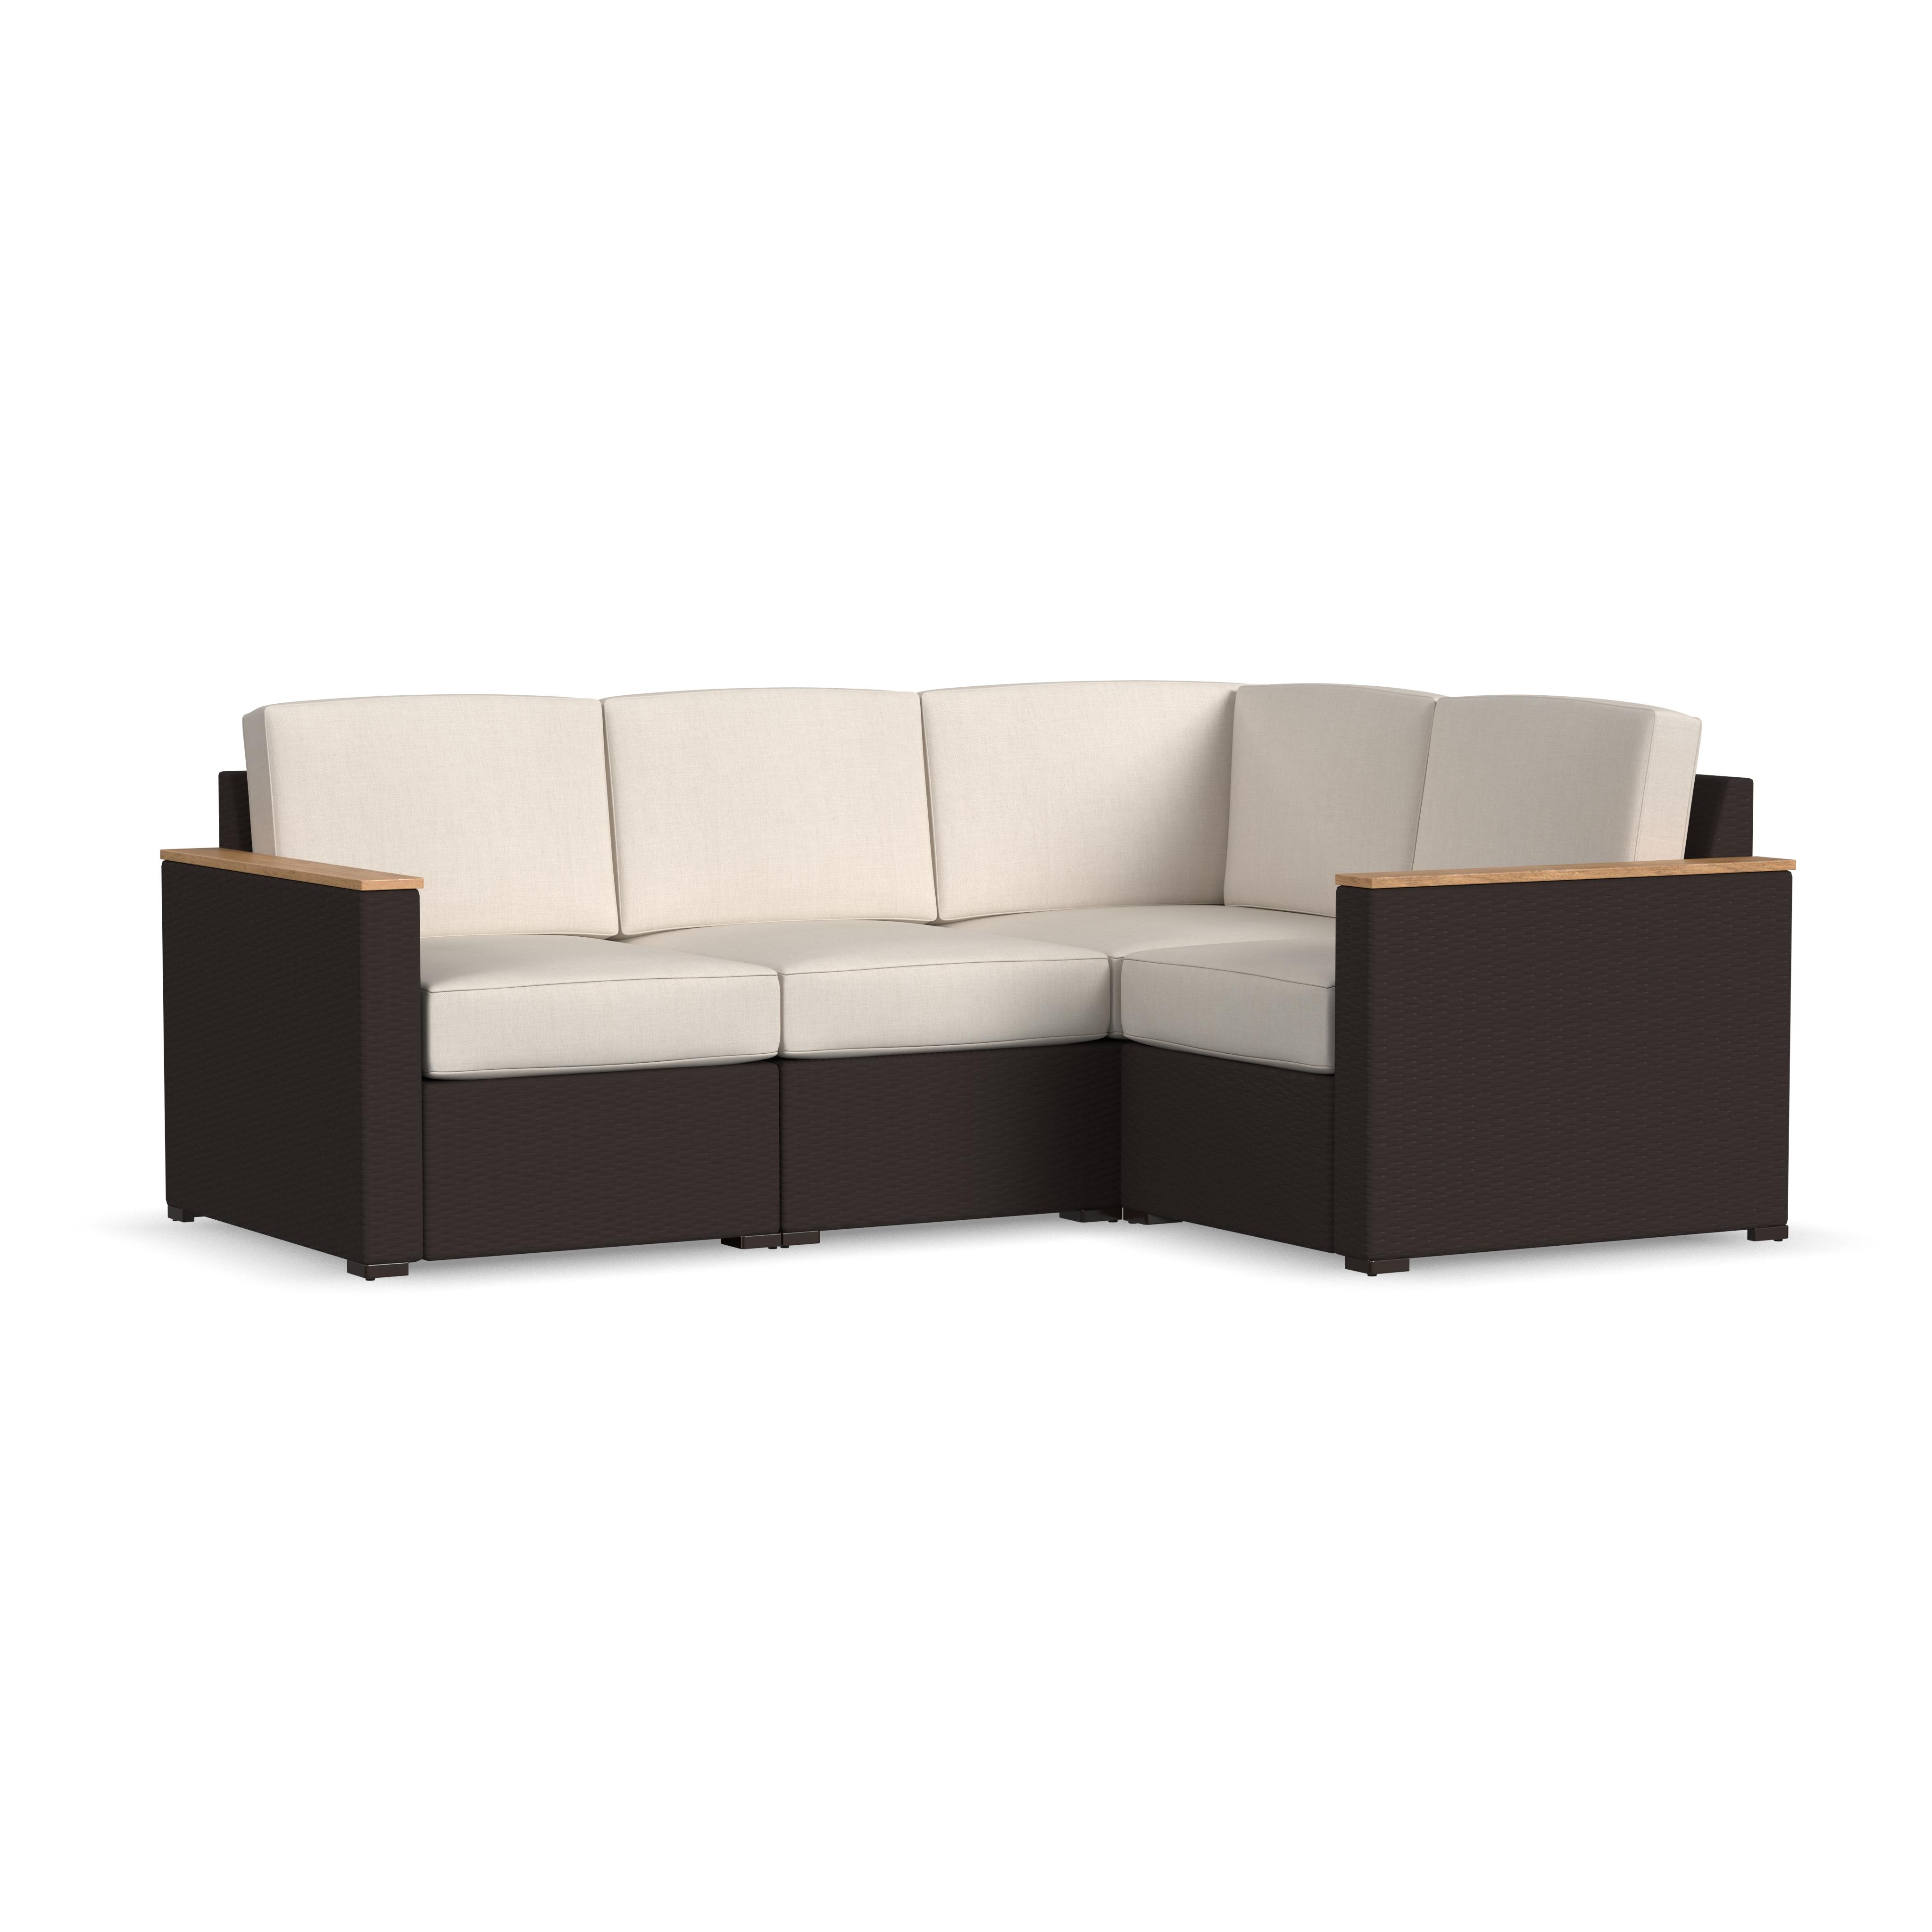 Homestyles Palm Springs Outdoor 4 Seat Sectional